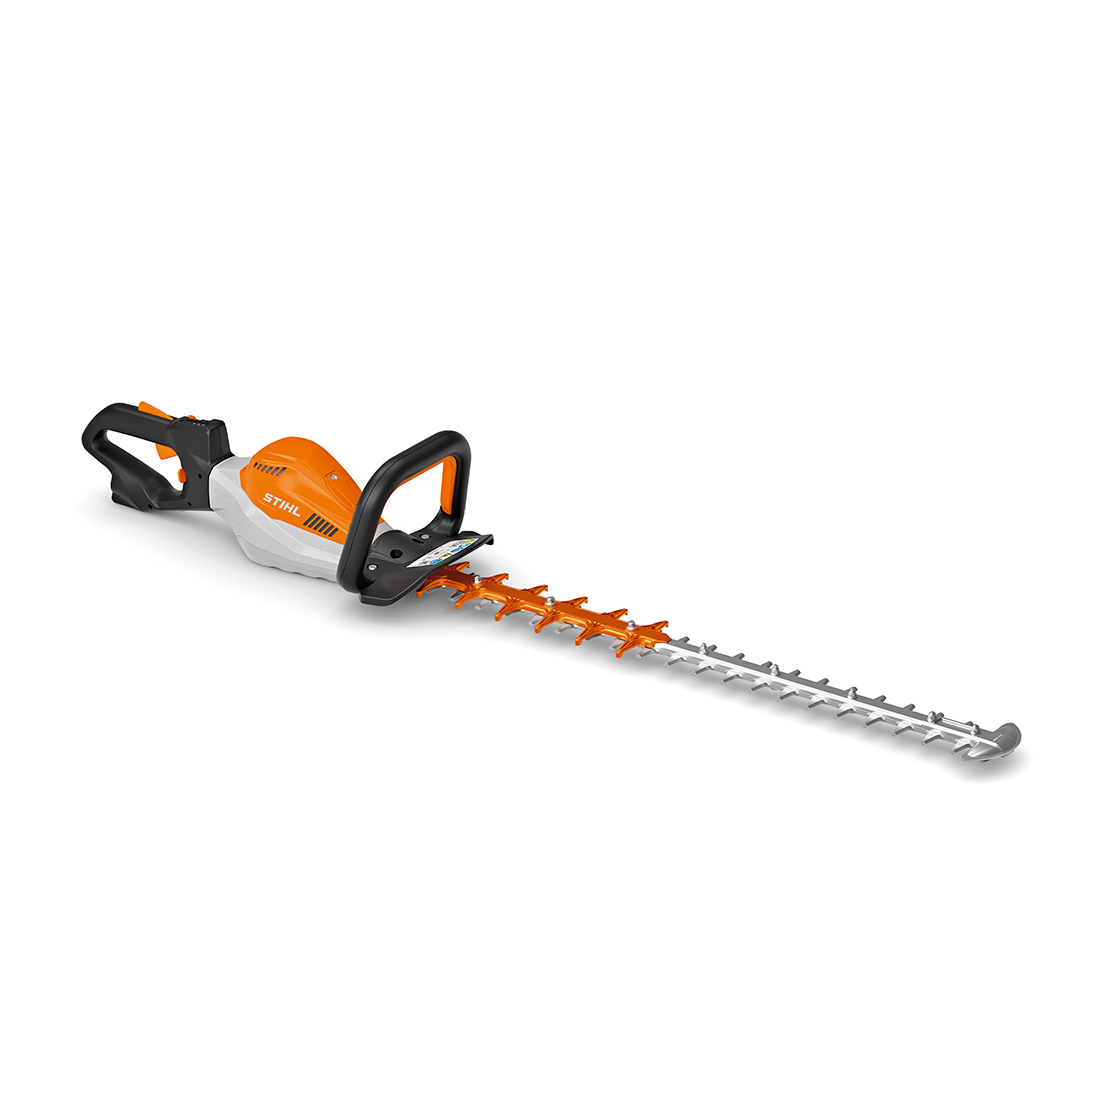 Double Sided Cordless Hedge Trimmer